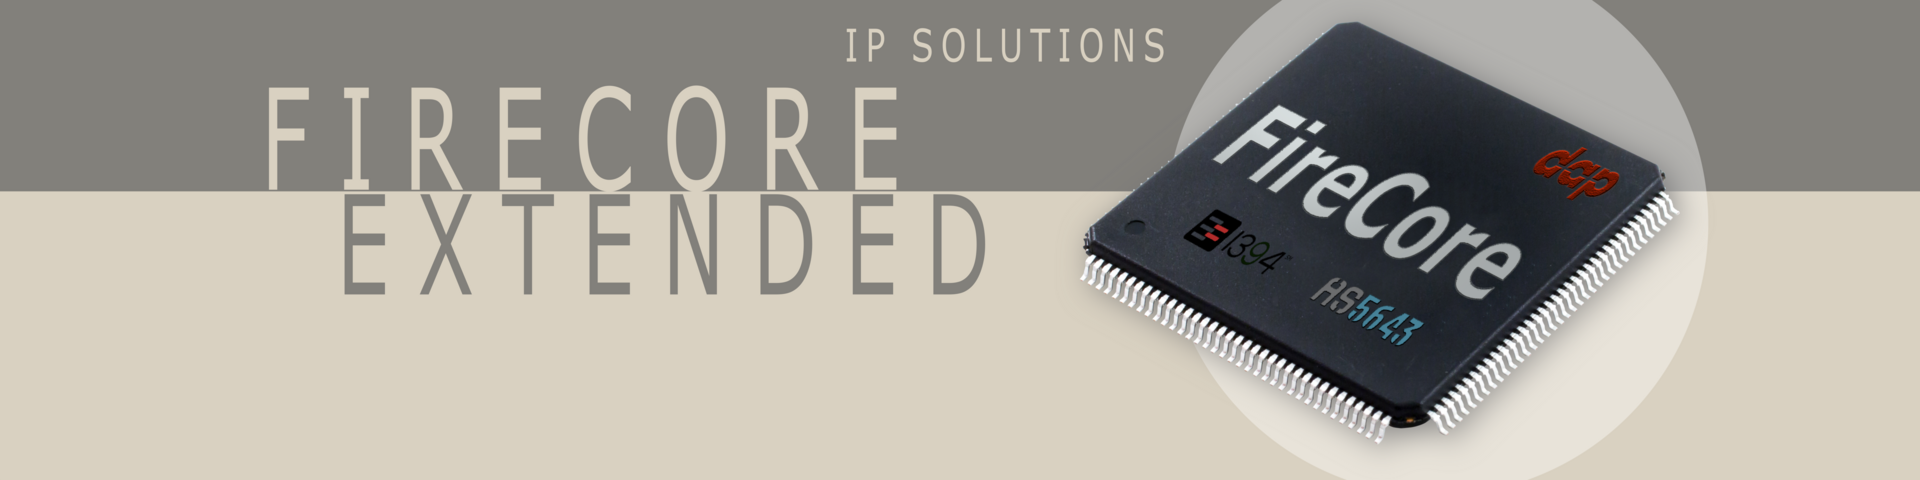 1394 and AS5643 IP Core solutions - FireCore Extended